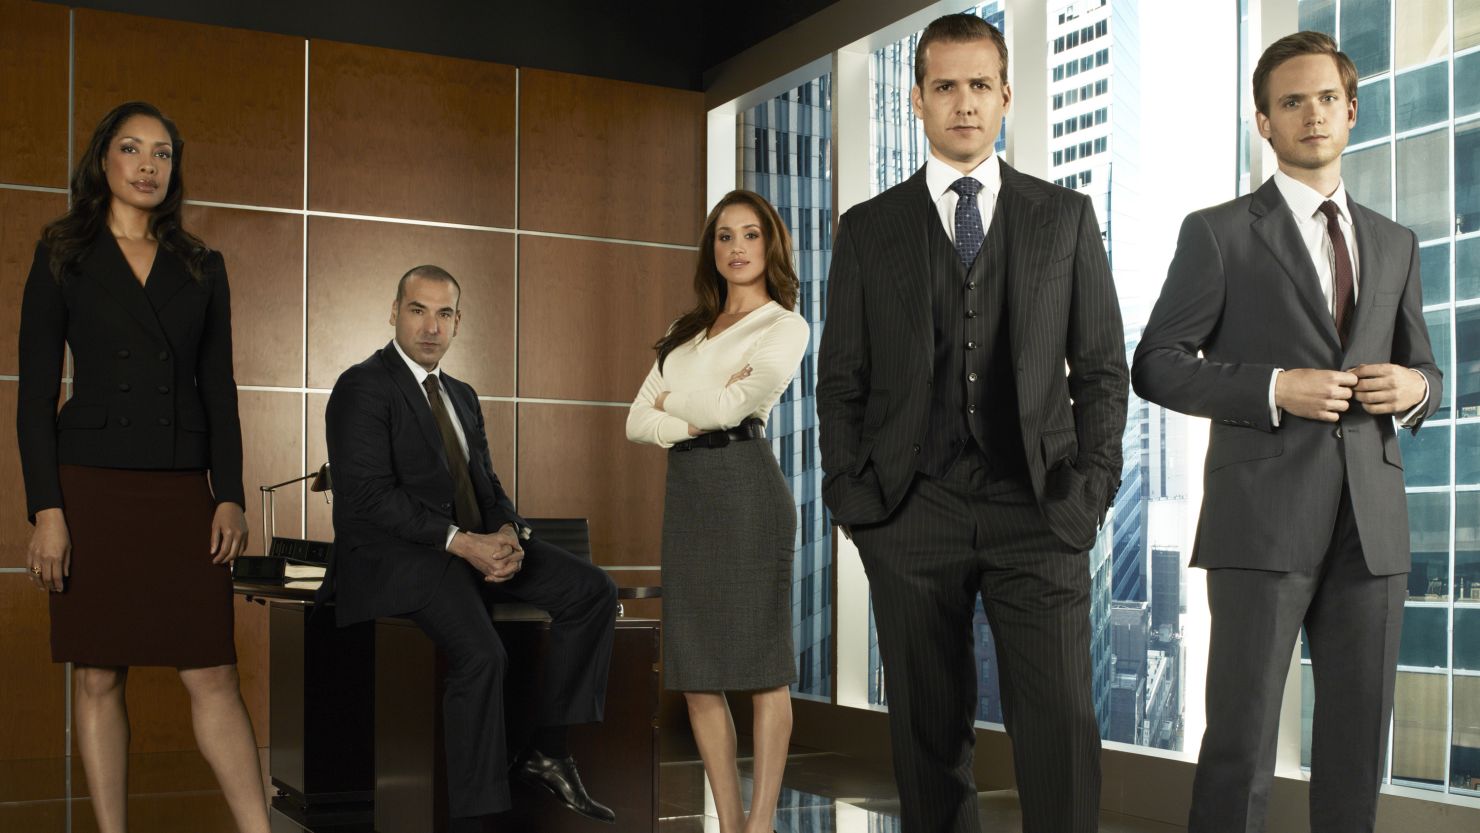 The cast of 'Suits.' From left: Gina Torres, Rick Hoffmann, Meghan Markle, Gabriel Macht and Patrick J. Adams.